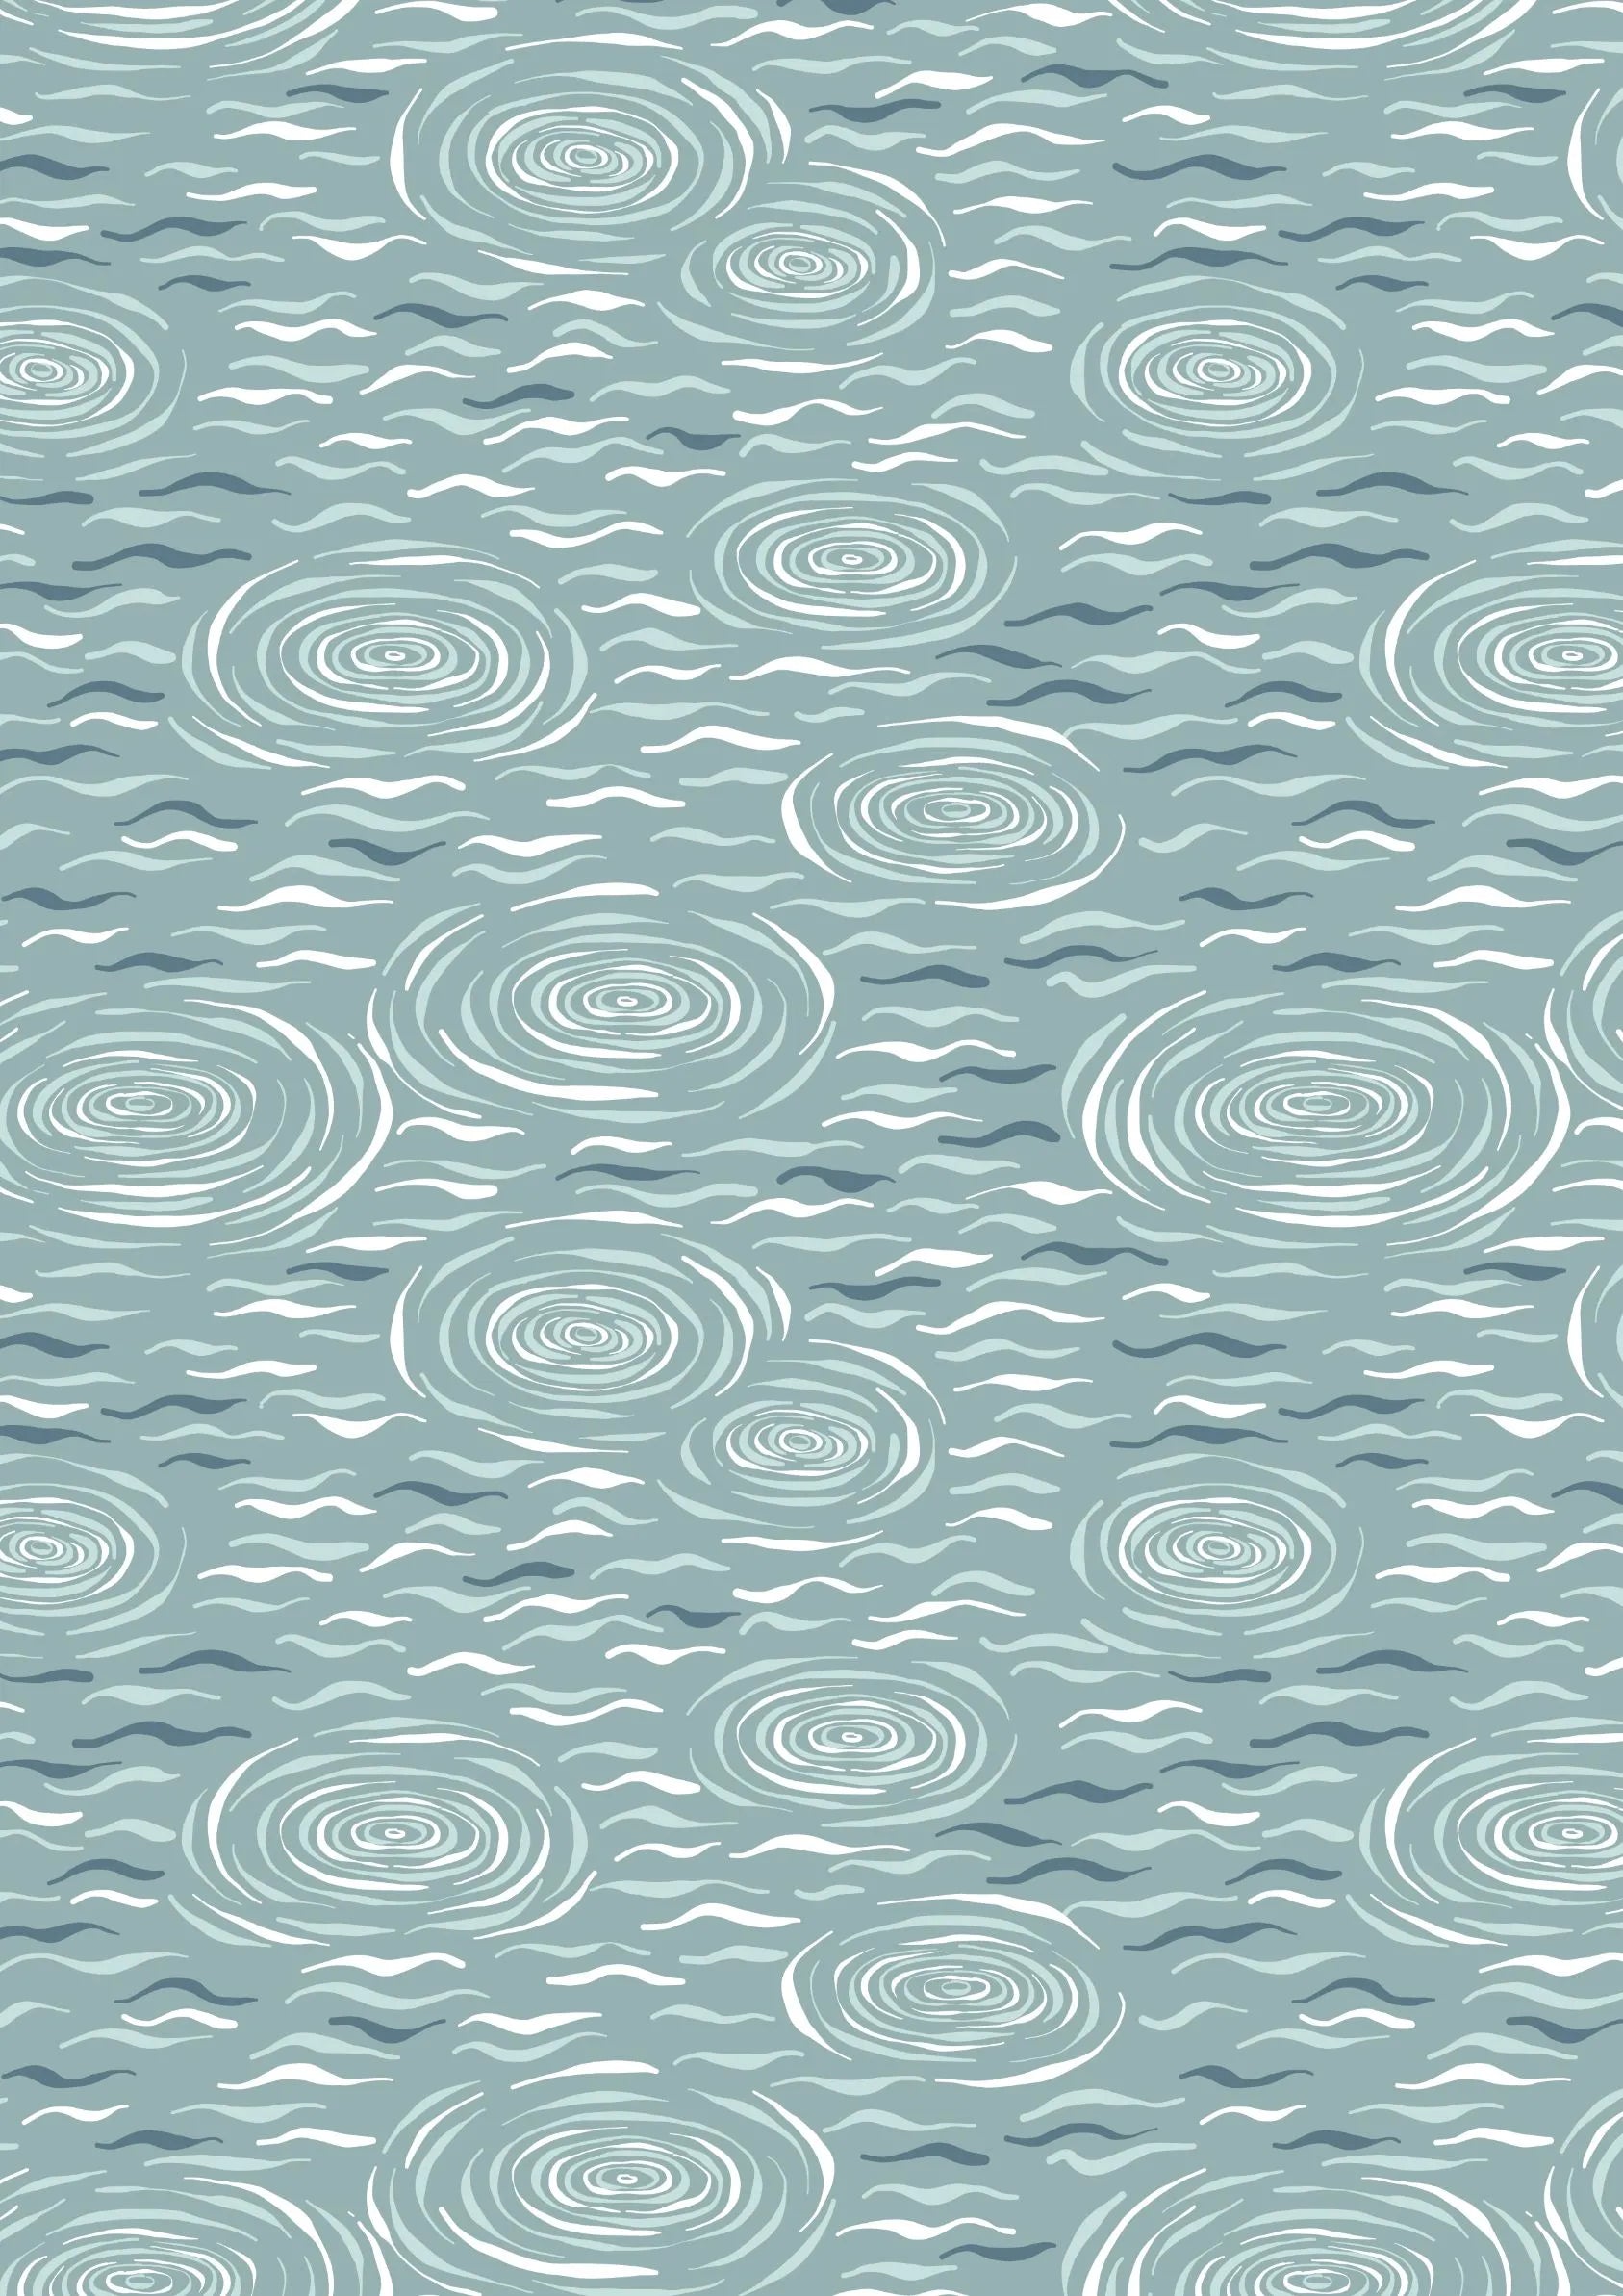 Lake ripples on a light blue cotton fabric - On the Lake by Lewis and Irene